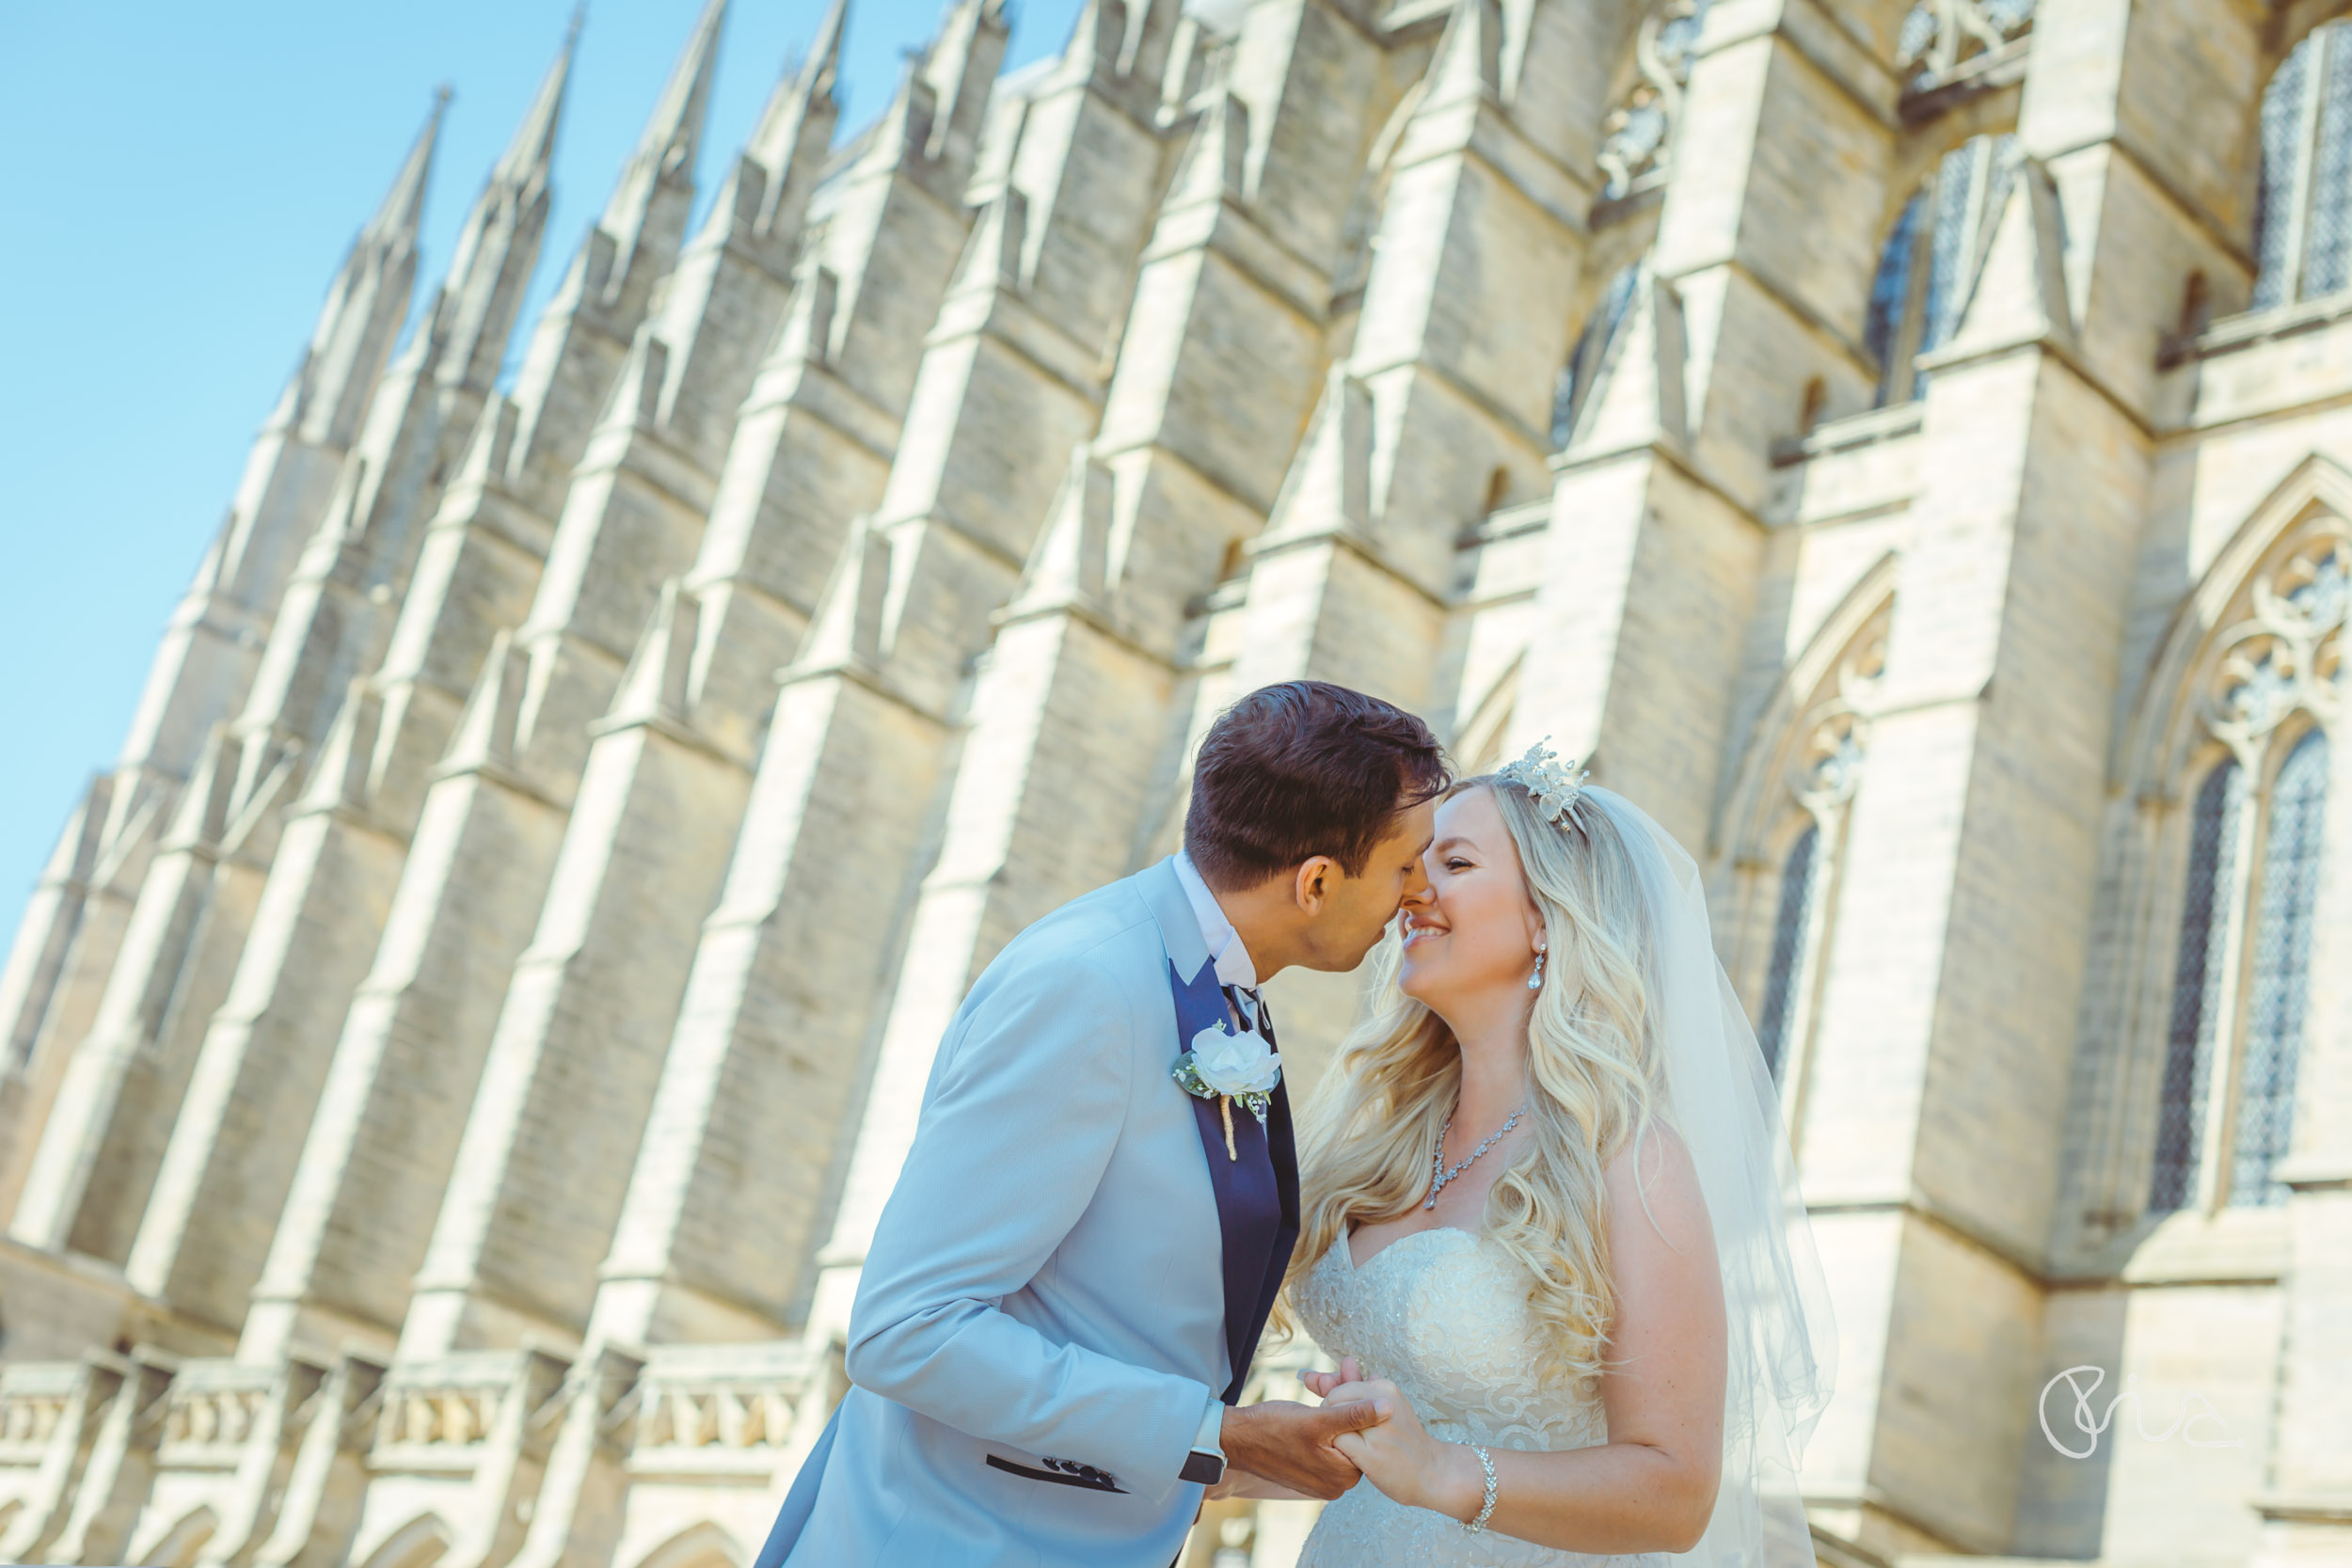 Bride and Groom at Lancing College Chapel wedding